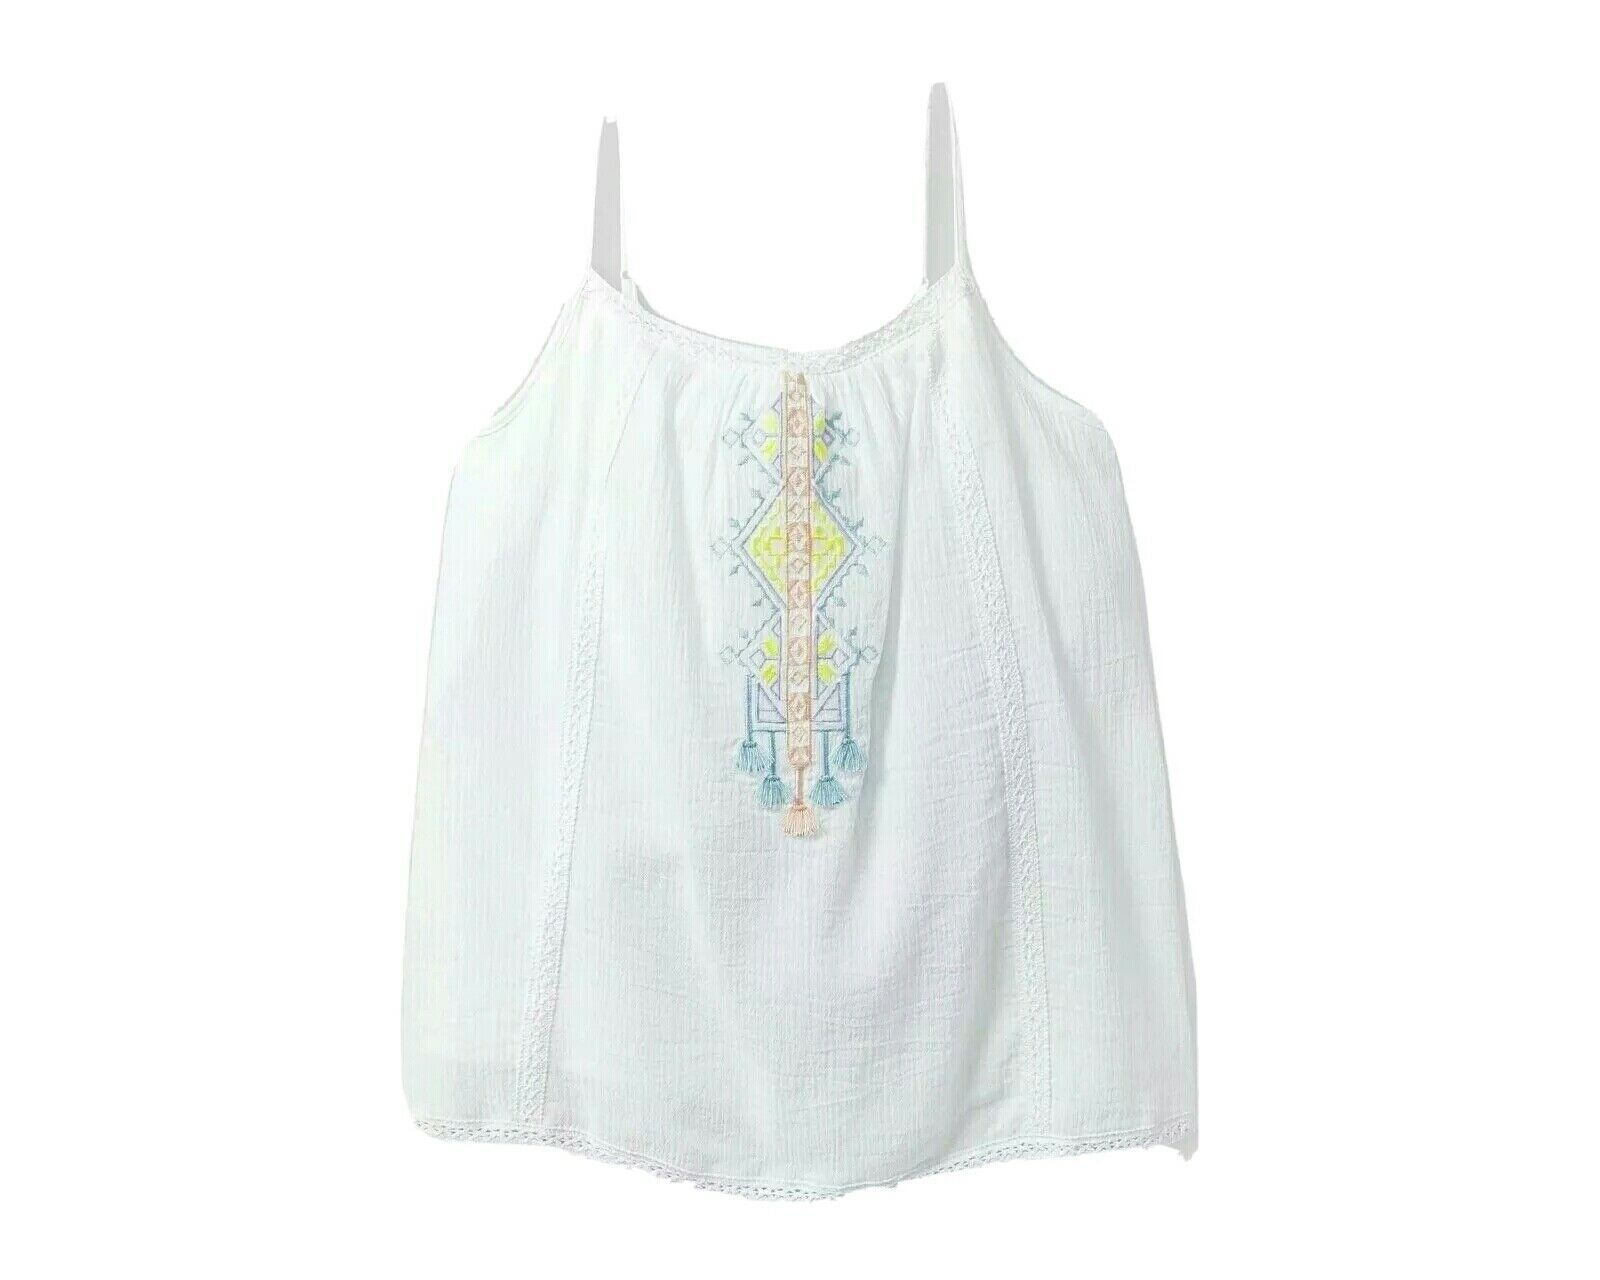 Girls' Embroidered Tank Top Straps- Art Class- Winter White - Large 10/12 Cute!